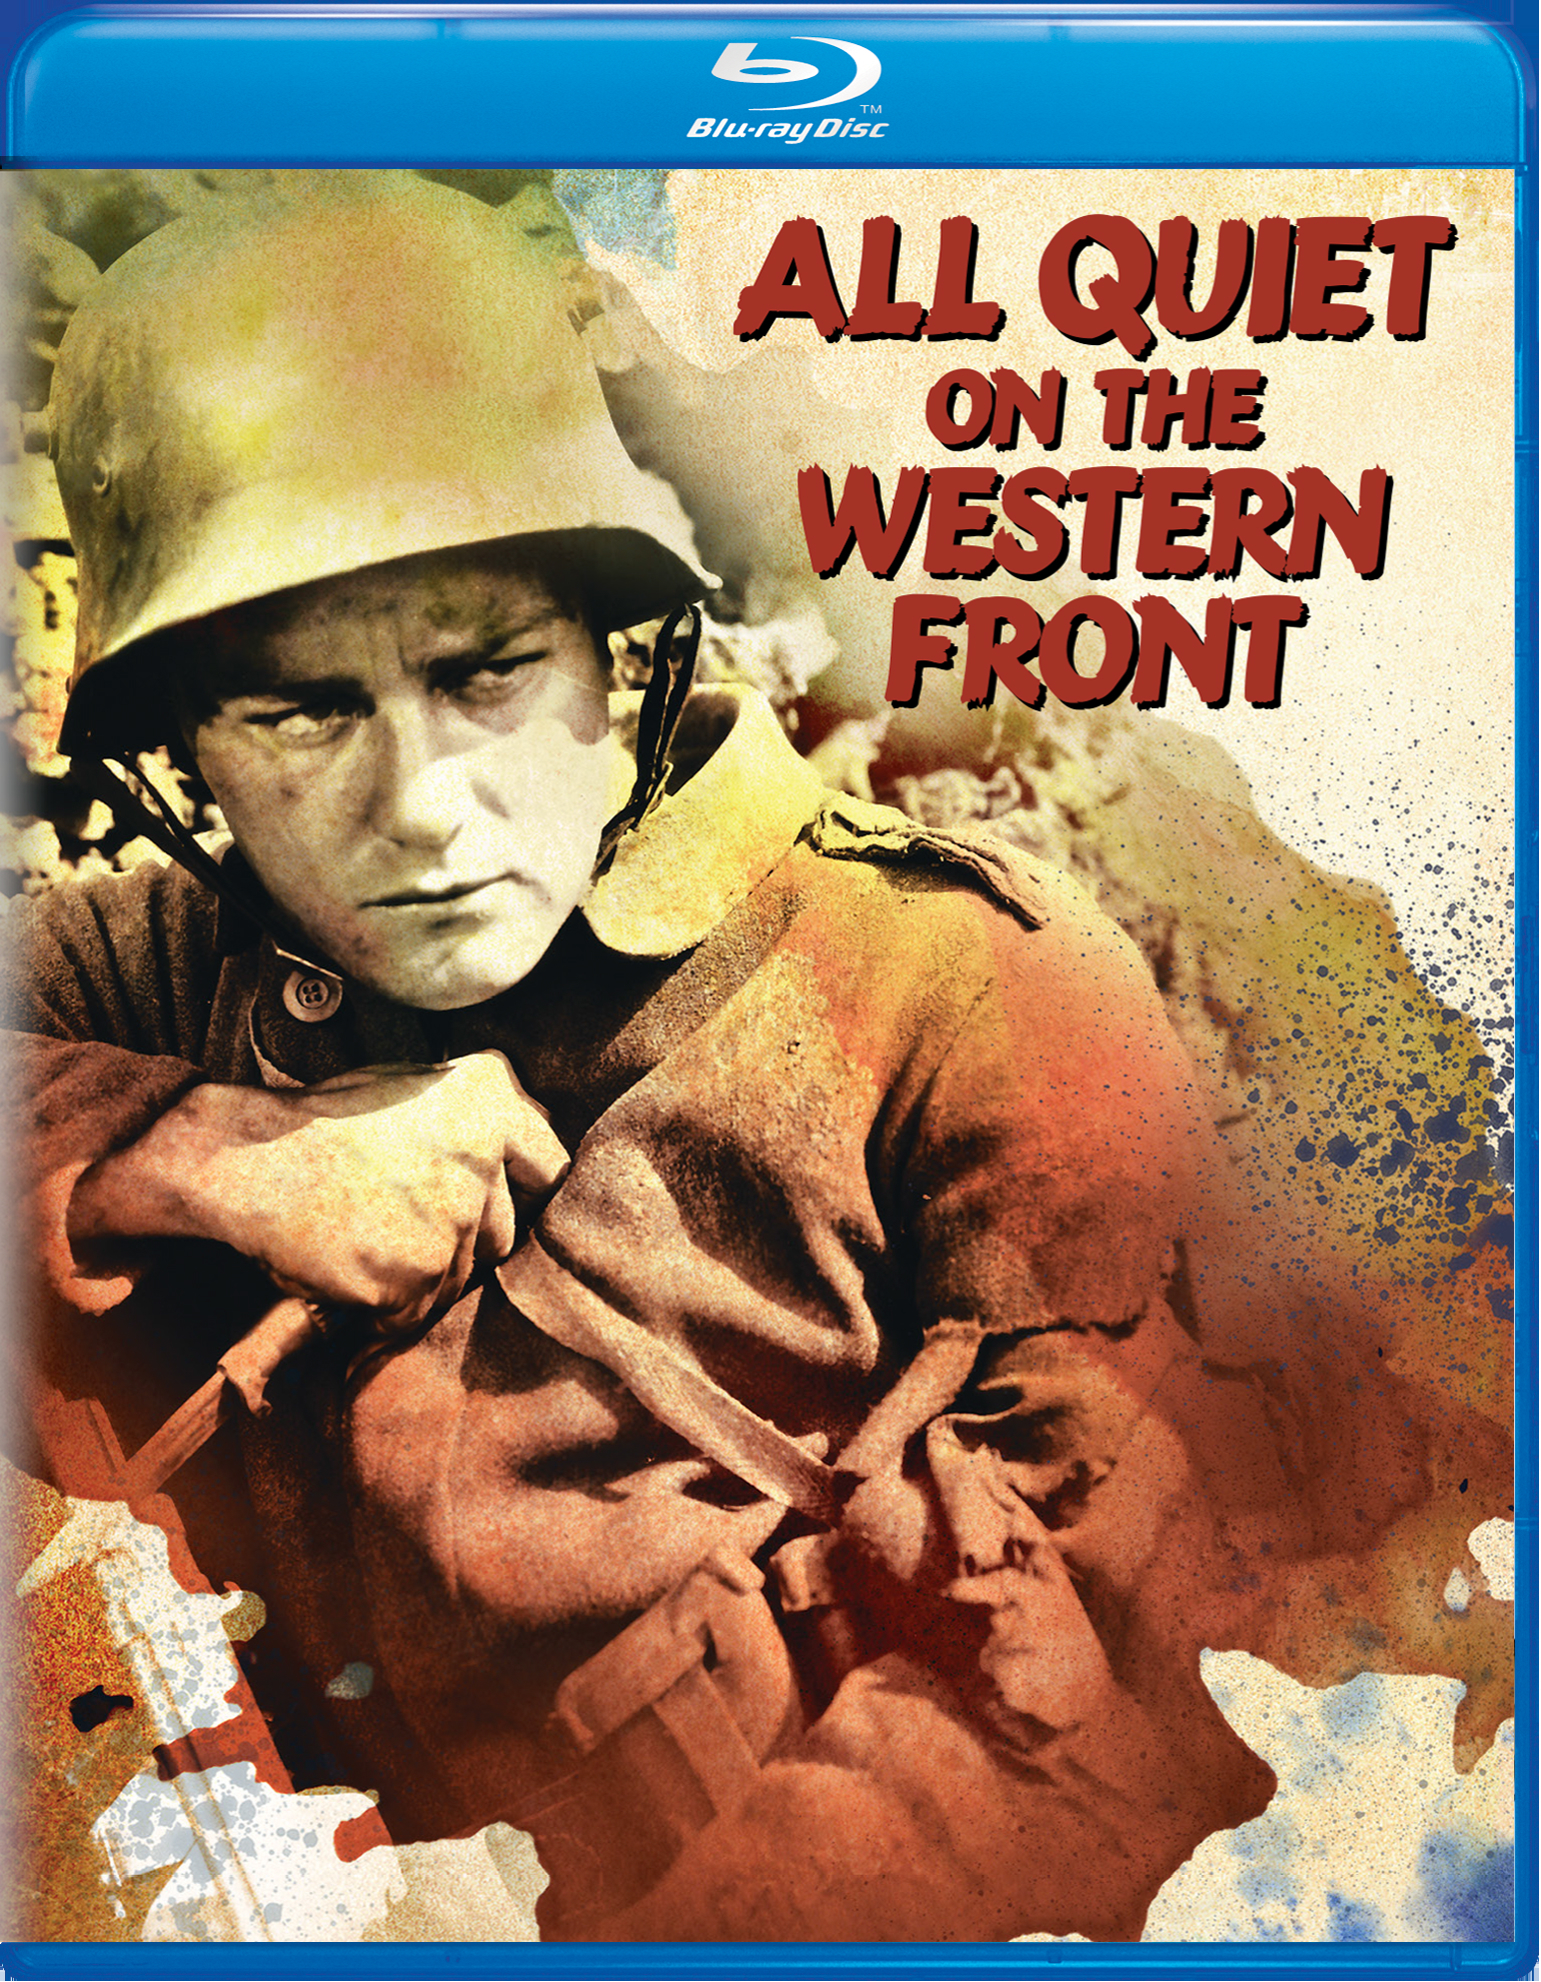 All Quiet On The Western Front (Blu-ray + Digital HD) - Blu-ray [ 1930 ]  - War Movies On Blu-ray - Movies On GRUV